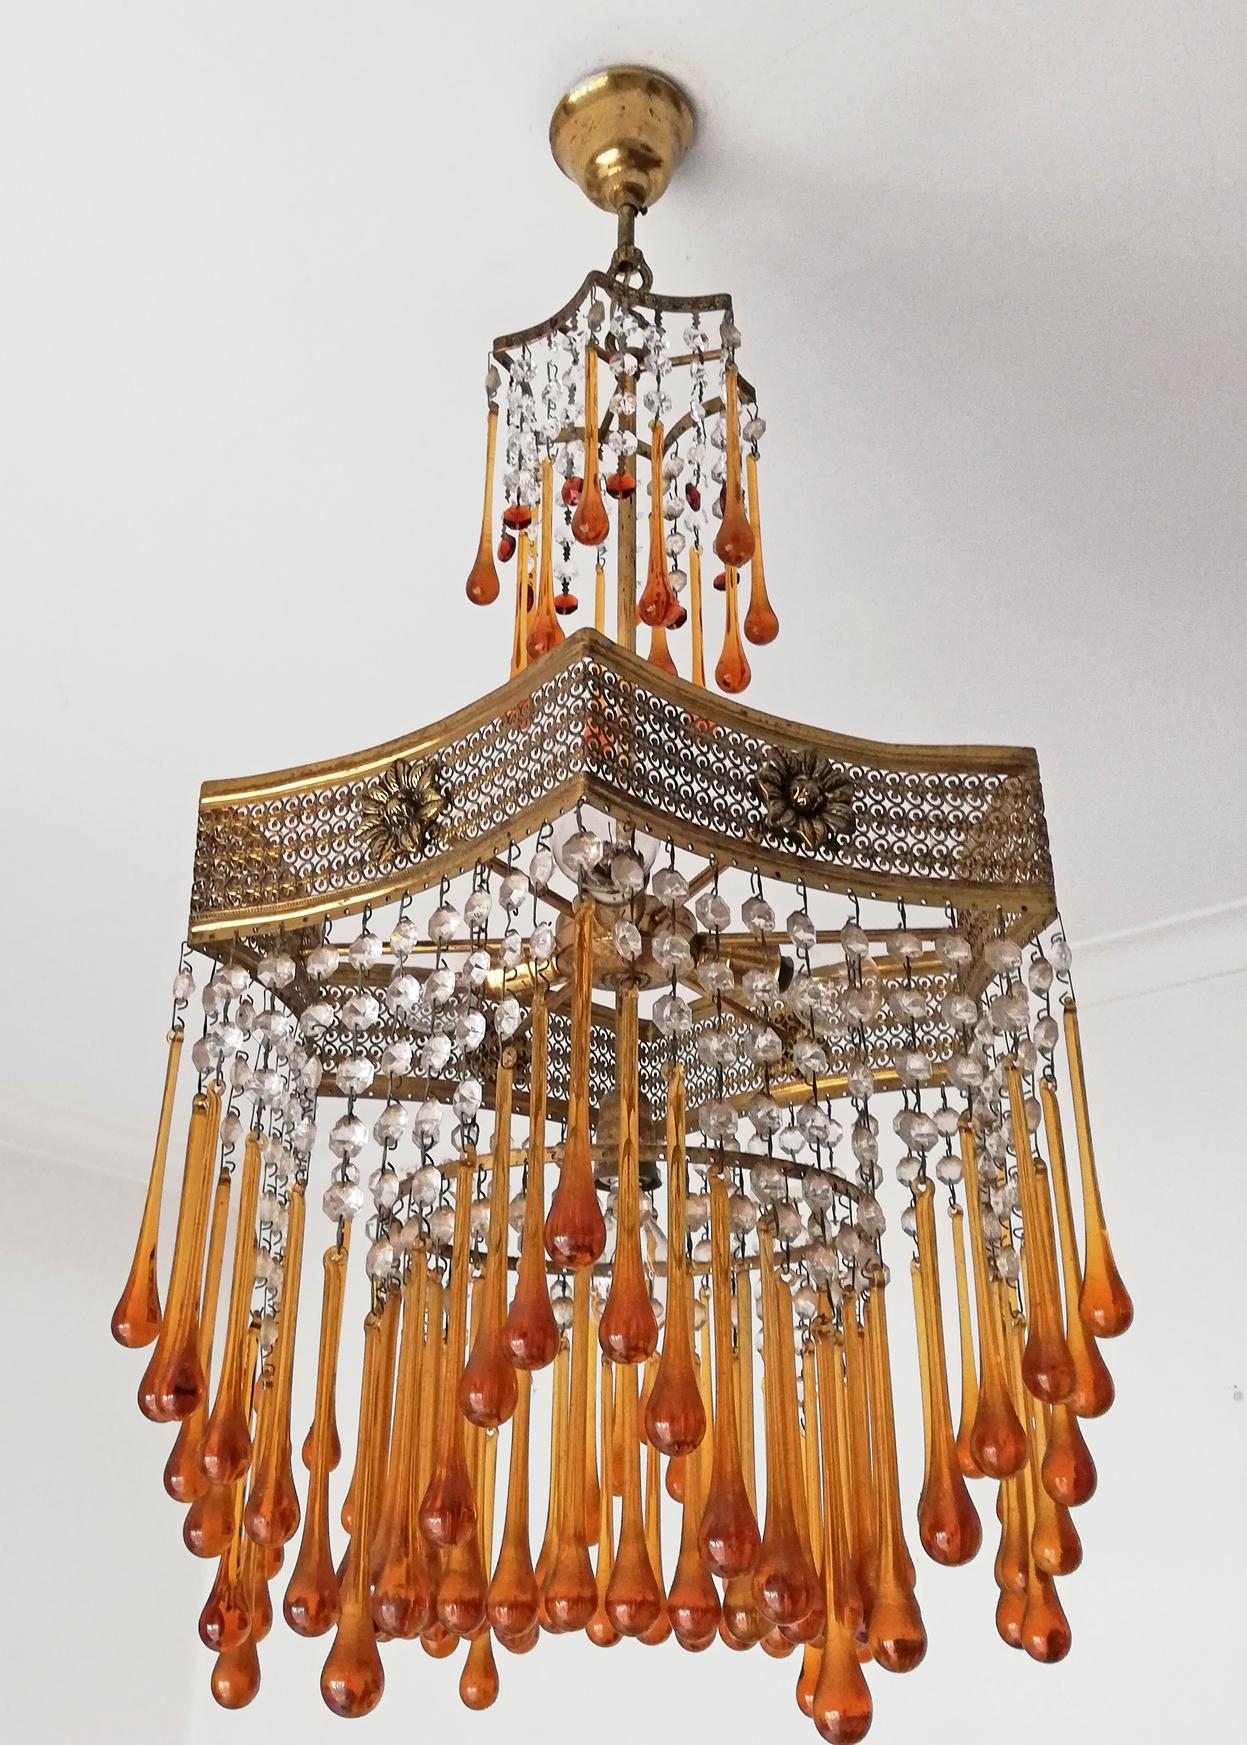 Fabulous Italian Murano Art Deco, Art Nouveau Amber glass drops and crystal 4-light gilt chandelier
Measures:
Diameter 16 in/ 40 cm
Height 32.3 in/ 82 cm
Weight 11 lb/ 5 Kg
Four light bulbs E14/ Good working condition/European wiring.
Your